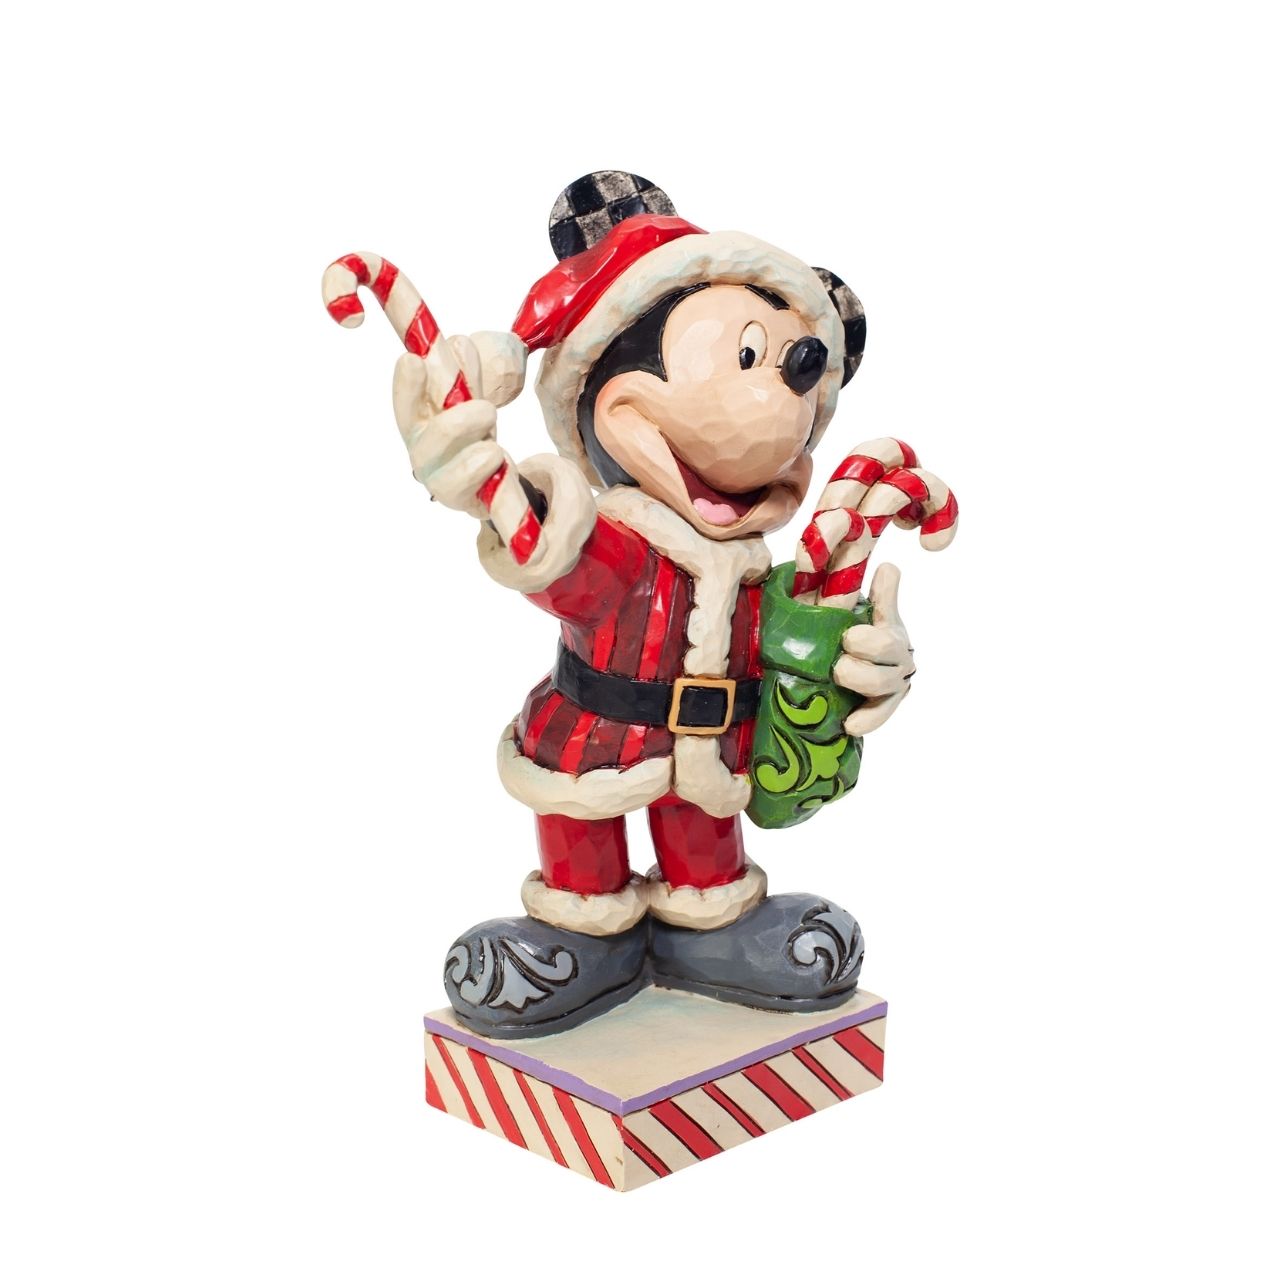 Disney Mickey Mouse with Candy Canes Figurine  Dressed in a Santa suit, Mickey masquerades as the holiday titan. Delivering candy canes to all the nice people he knows, he brings the spirit of Christmas wherever he goes. Celebrate the most wonderful time of the year with Disney by Jim Shore.